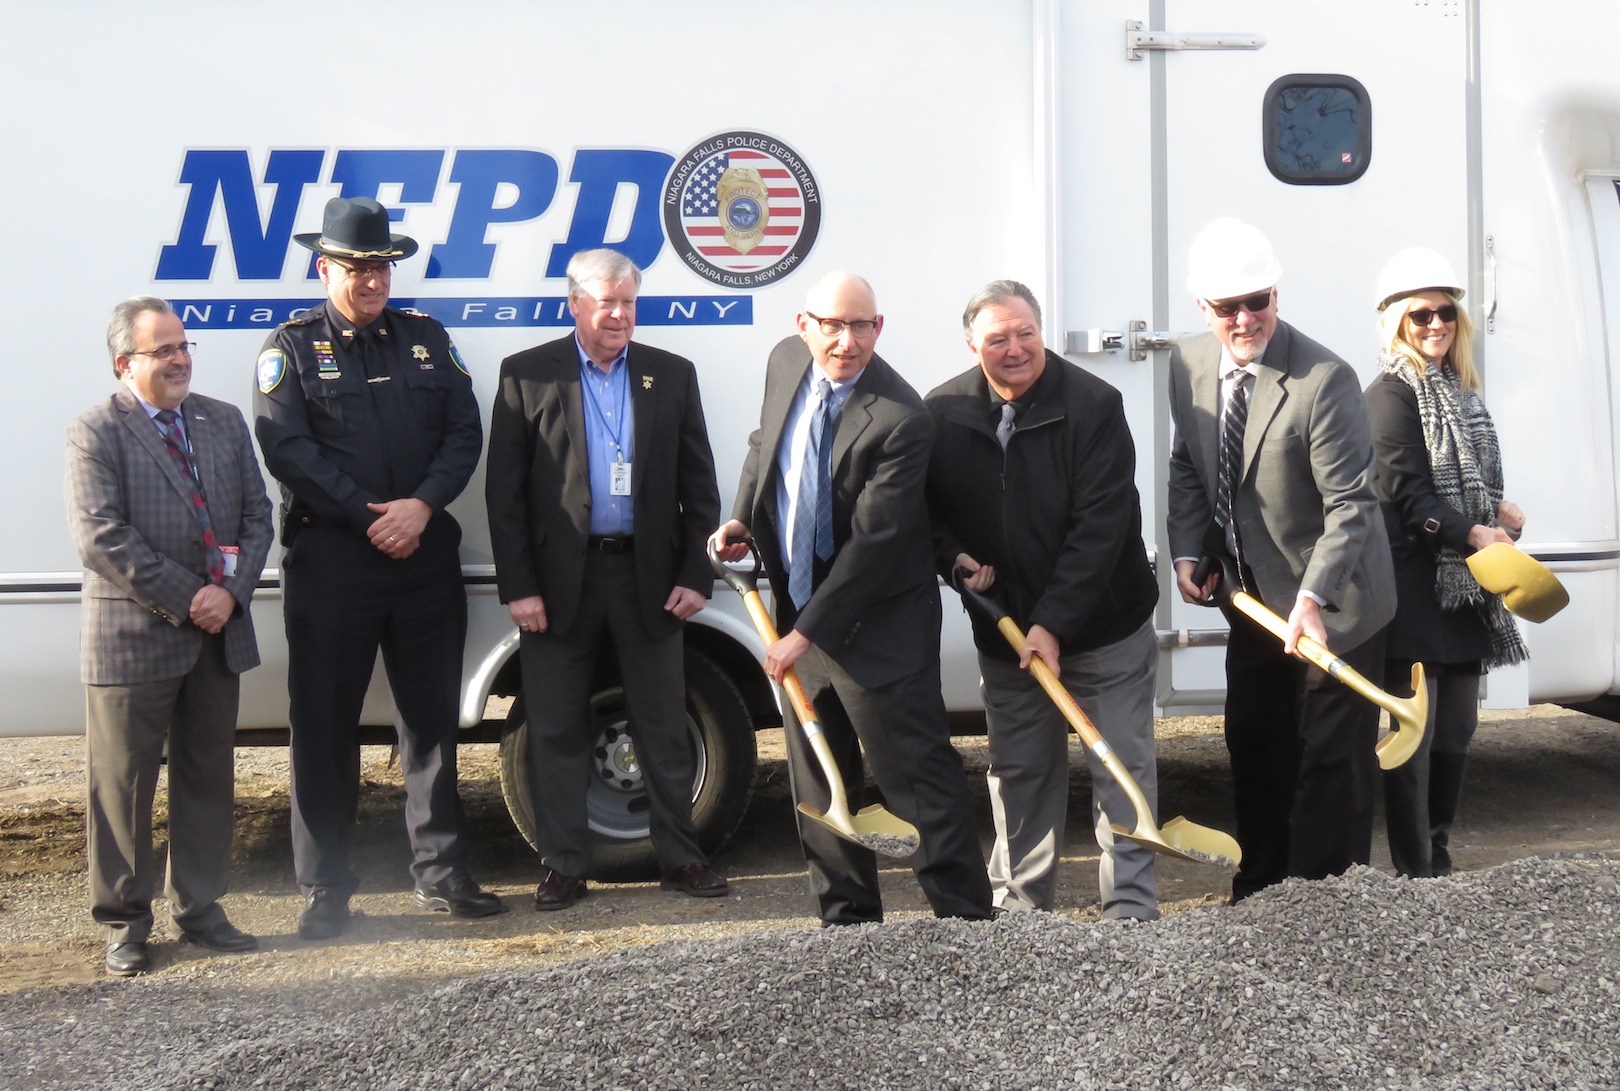 From left, Niagara County Department of Economic Development Commissioner Michael Casale, Niagara County Sheriff James Voutour and Niagara County Legislator David Godfrey watch as New York State Homes and Community Renewal Assistant Commissioner Leonard Skrill, Town of Niagara Supervisor Lee Wallace, Empire Emergency Apparatus President Michael McLaughlin and Kathleen McLaughlin break ground on a new 10,000-square-foot expansion. (Photo by David Yarger)